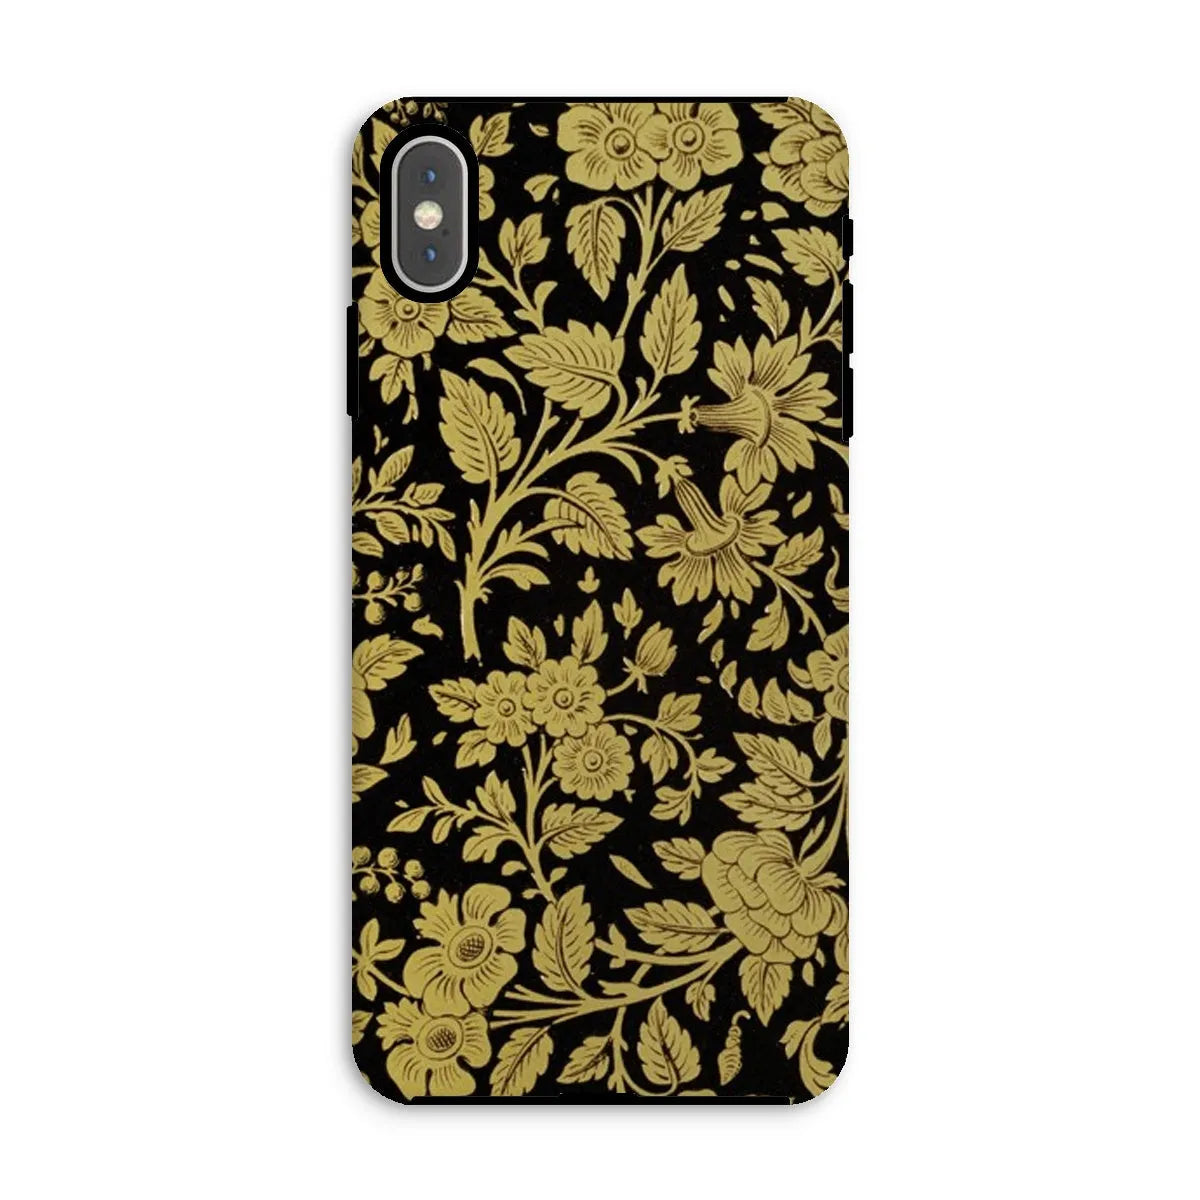 Indian Gold Lacquer - Aesthetic Pattern Art Phone Case - Iphone Xs Max / Matte - Mobile Phone Cases - Aesthetic Art